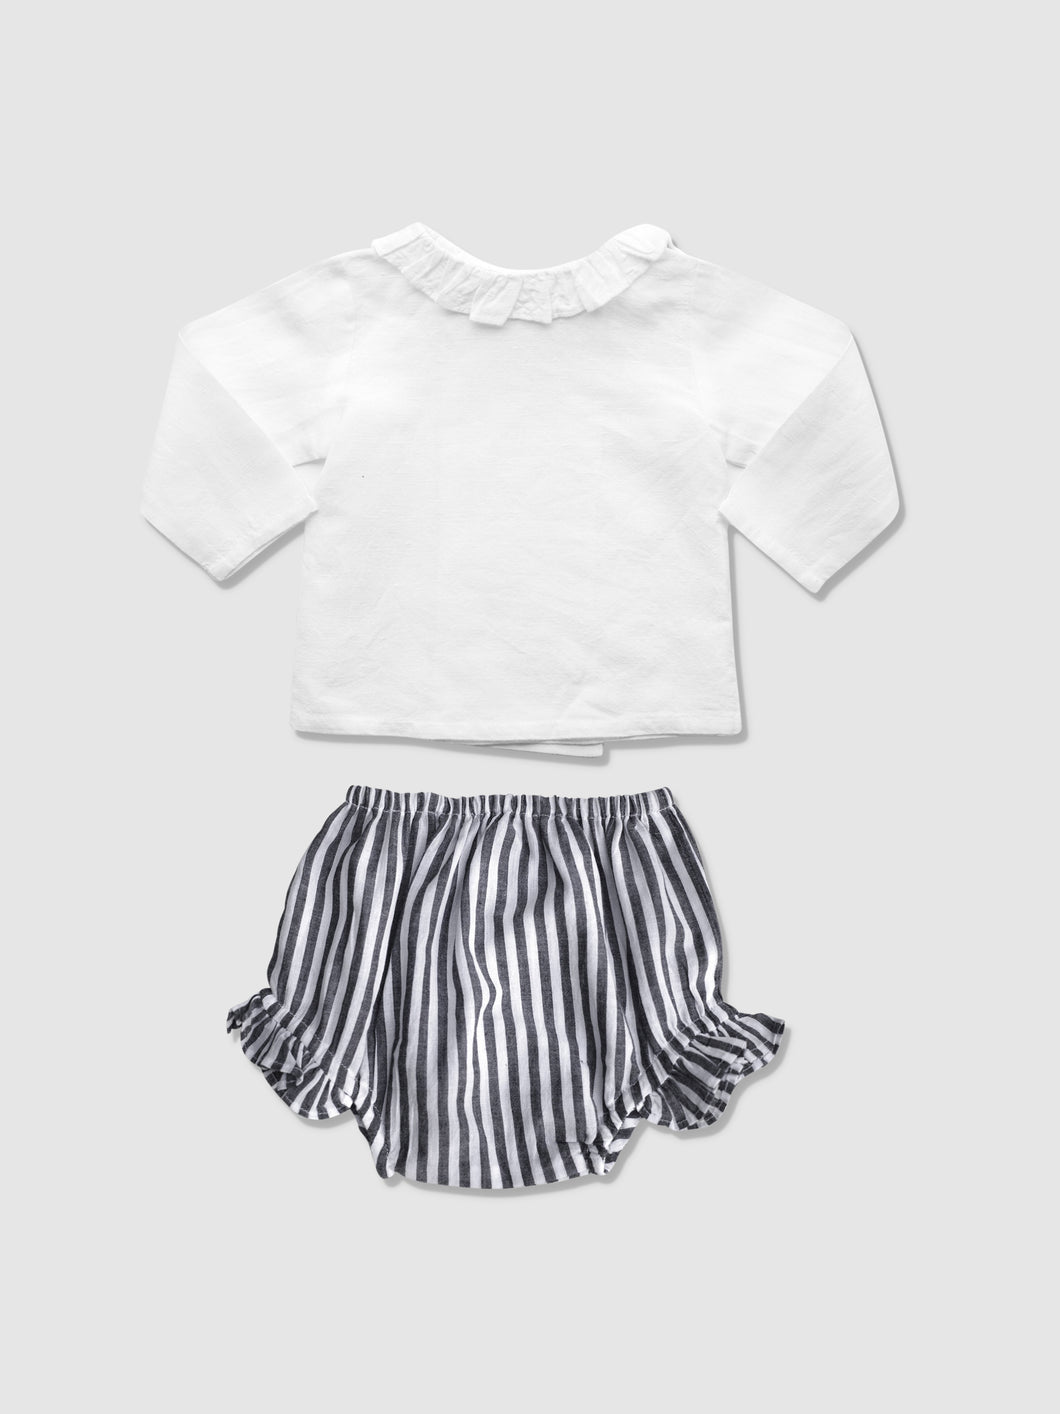 Double Button Blouse + Harbor Island Stripe Frill Bloomer Gift Set